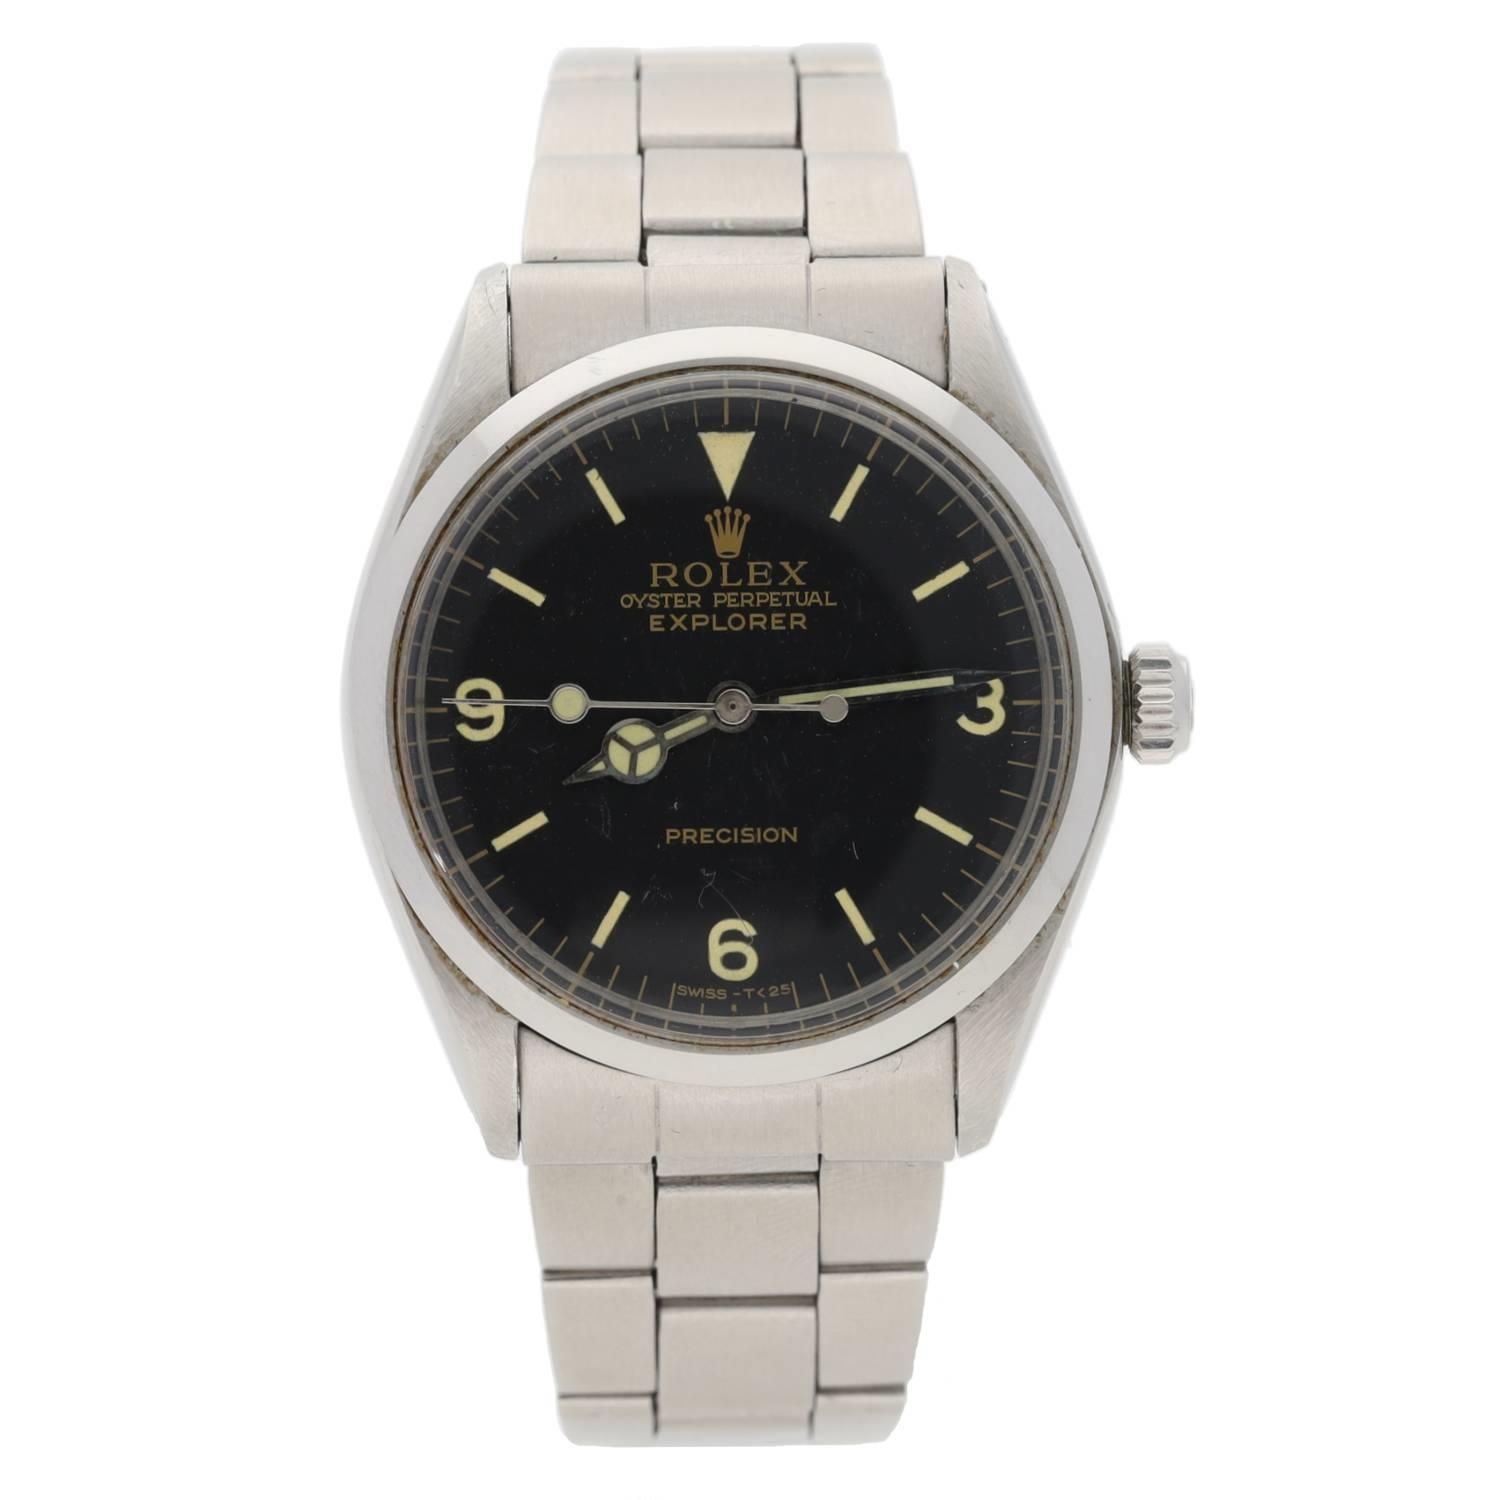 Rolex Oyster Perpetual Precision stainless steel gentleman’s wristwatch, reference no. 5500,